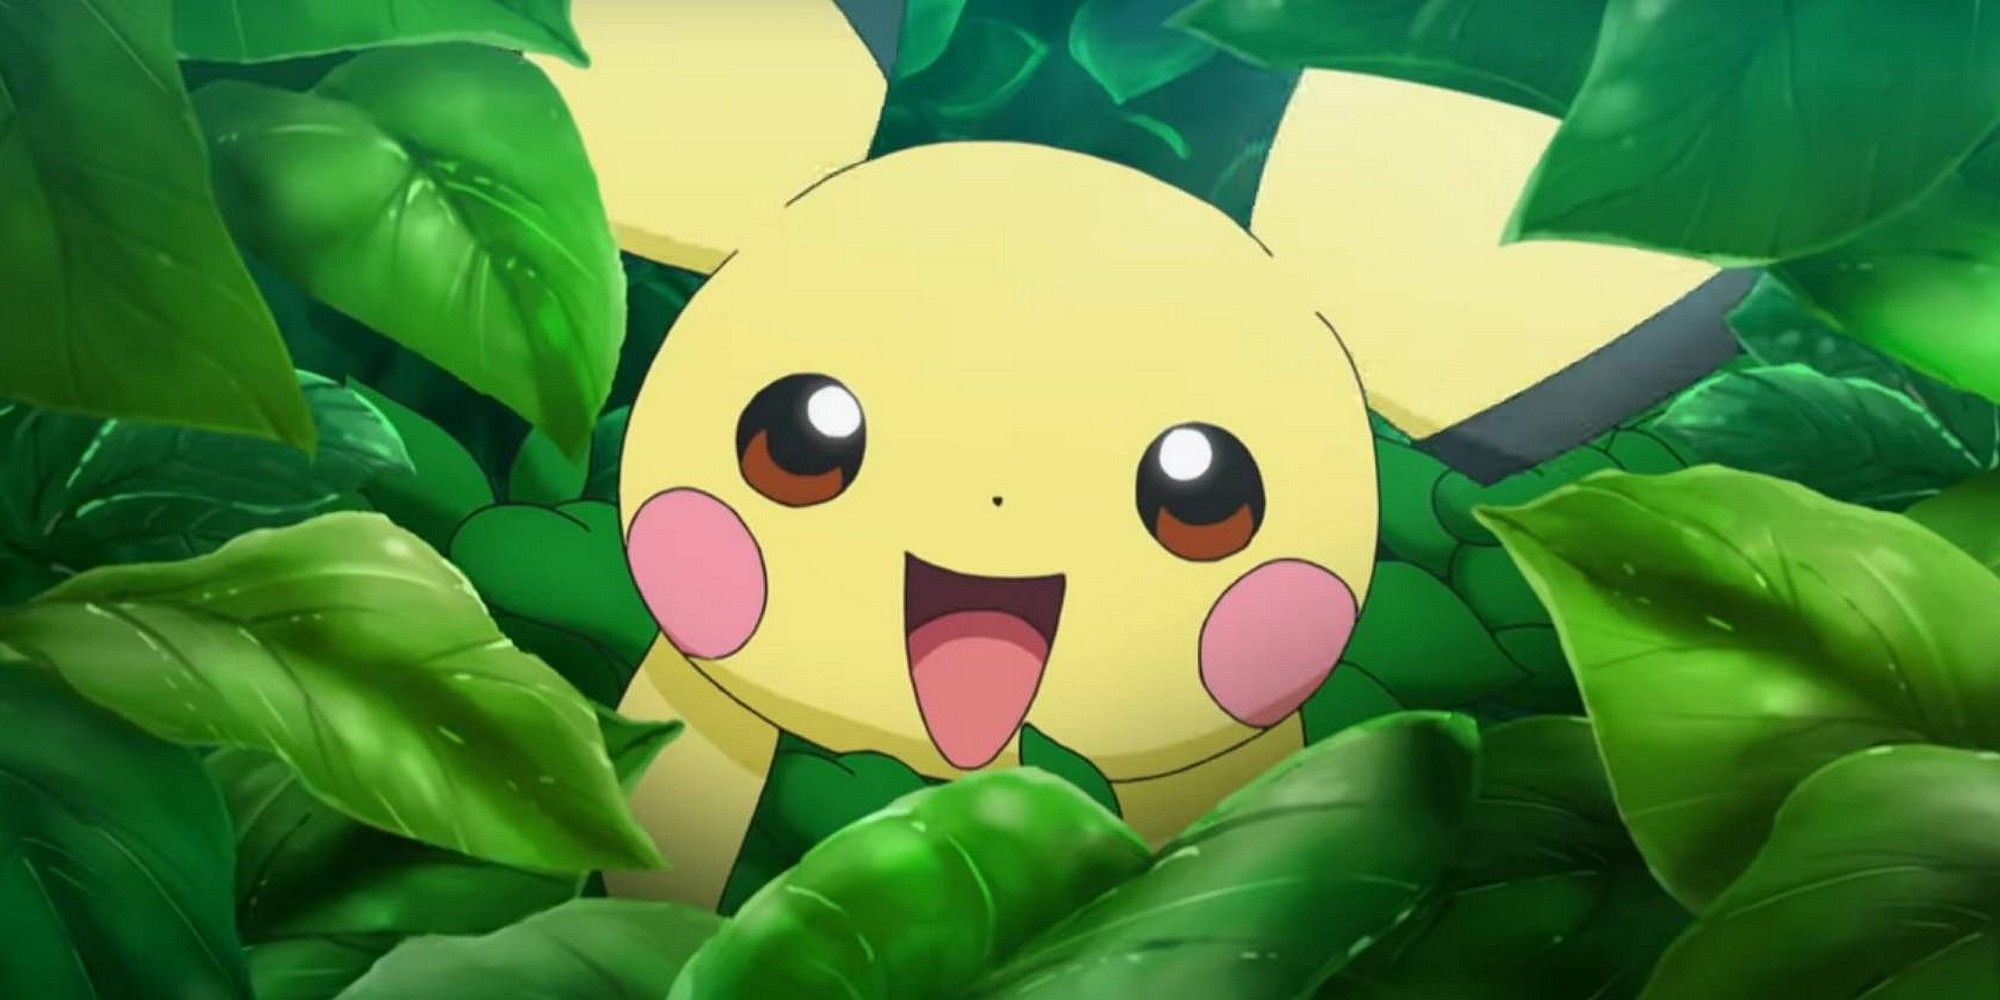 The Pokemon Pichu smiling in the leaves